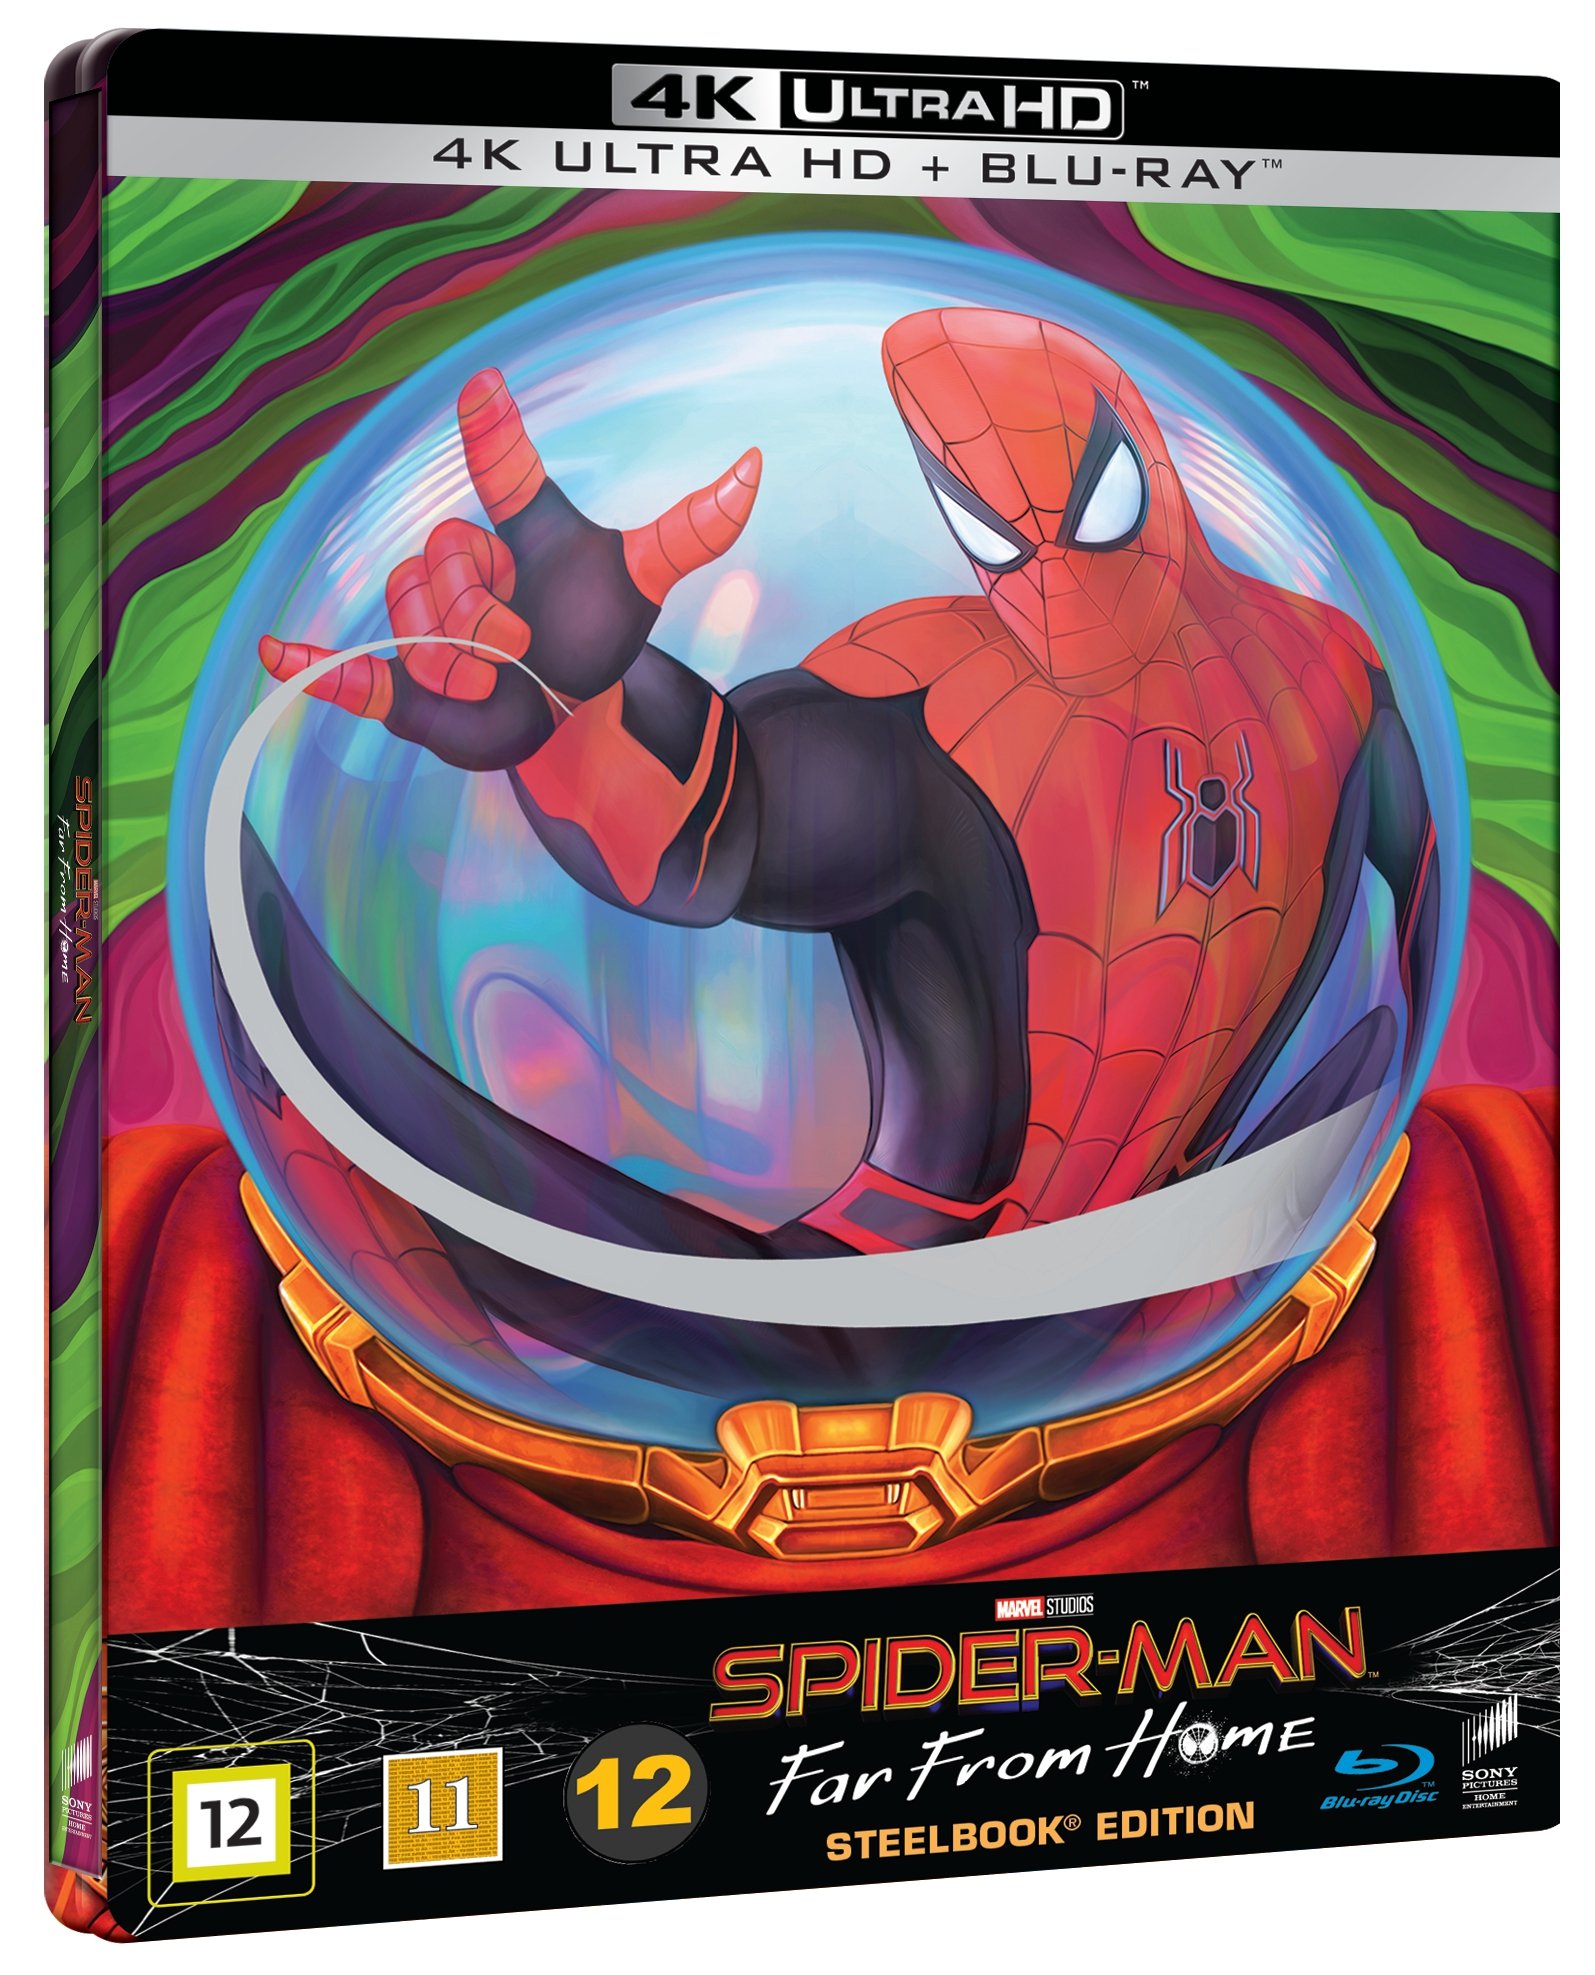 download spider man far from